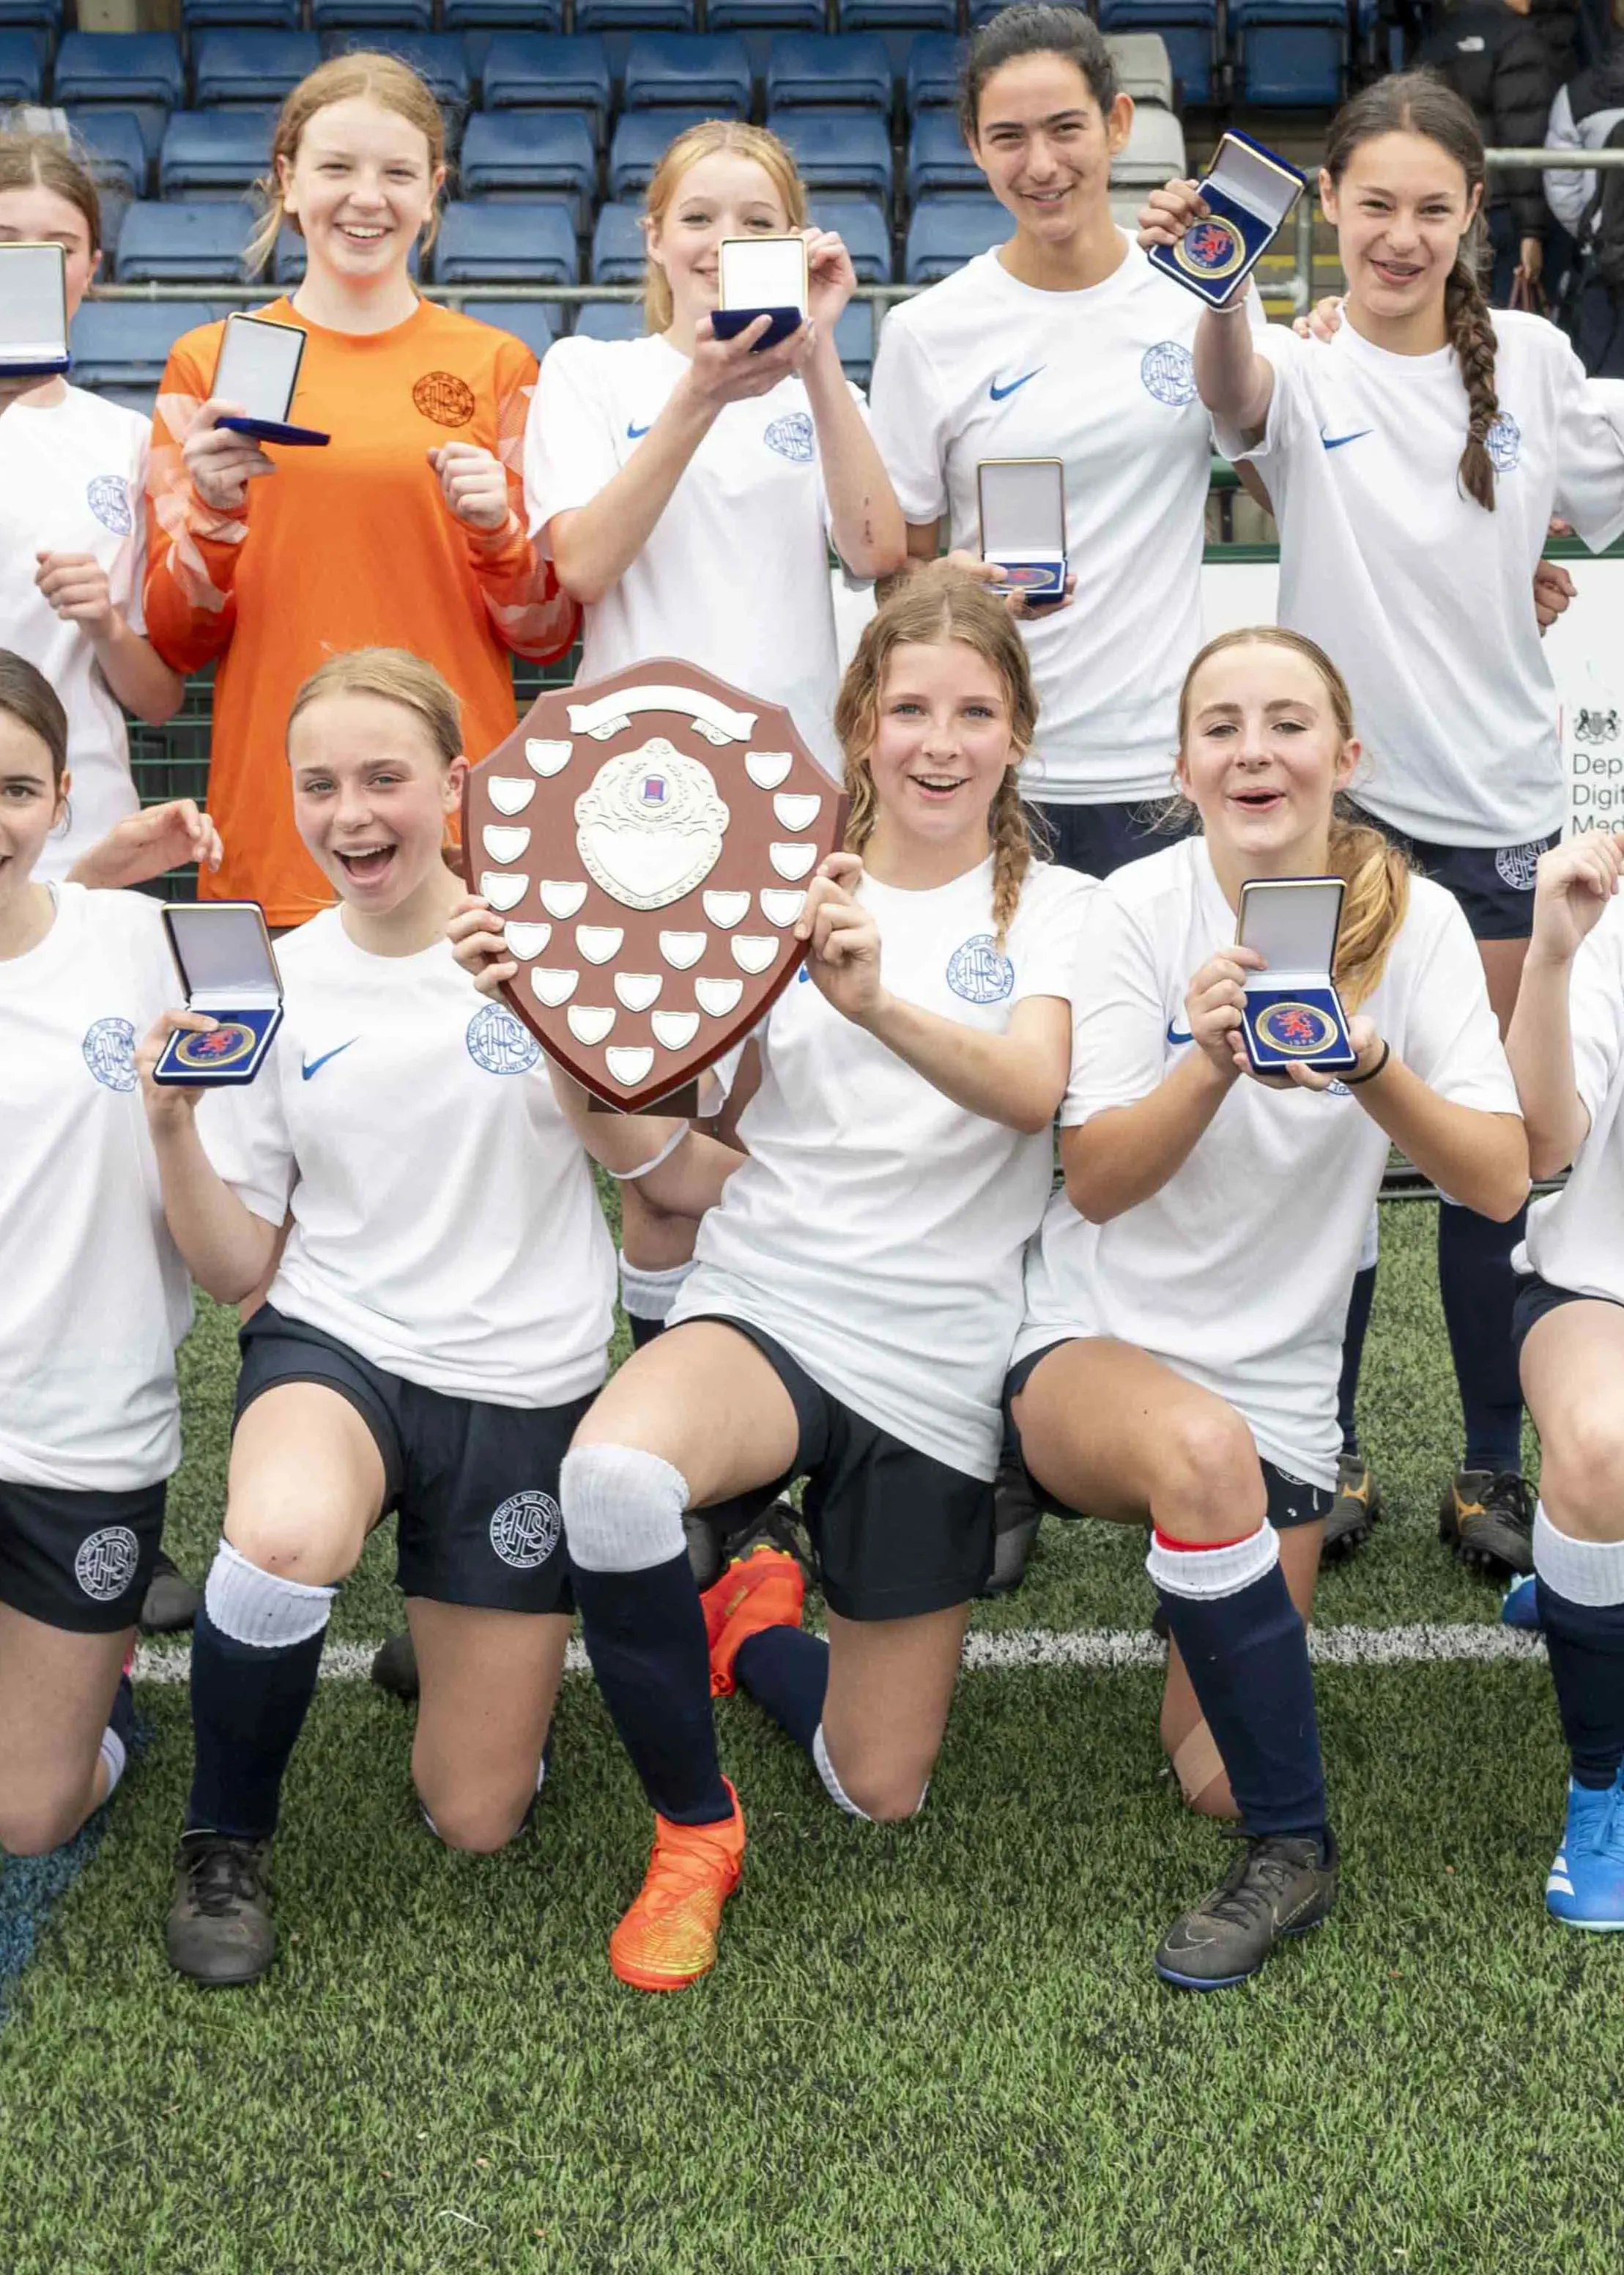 Team photo of U15 football girls team with trophy| Ibstock Place School, a private school near Richmond, Barnes, Putney, Kingston, and Wandsworth.